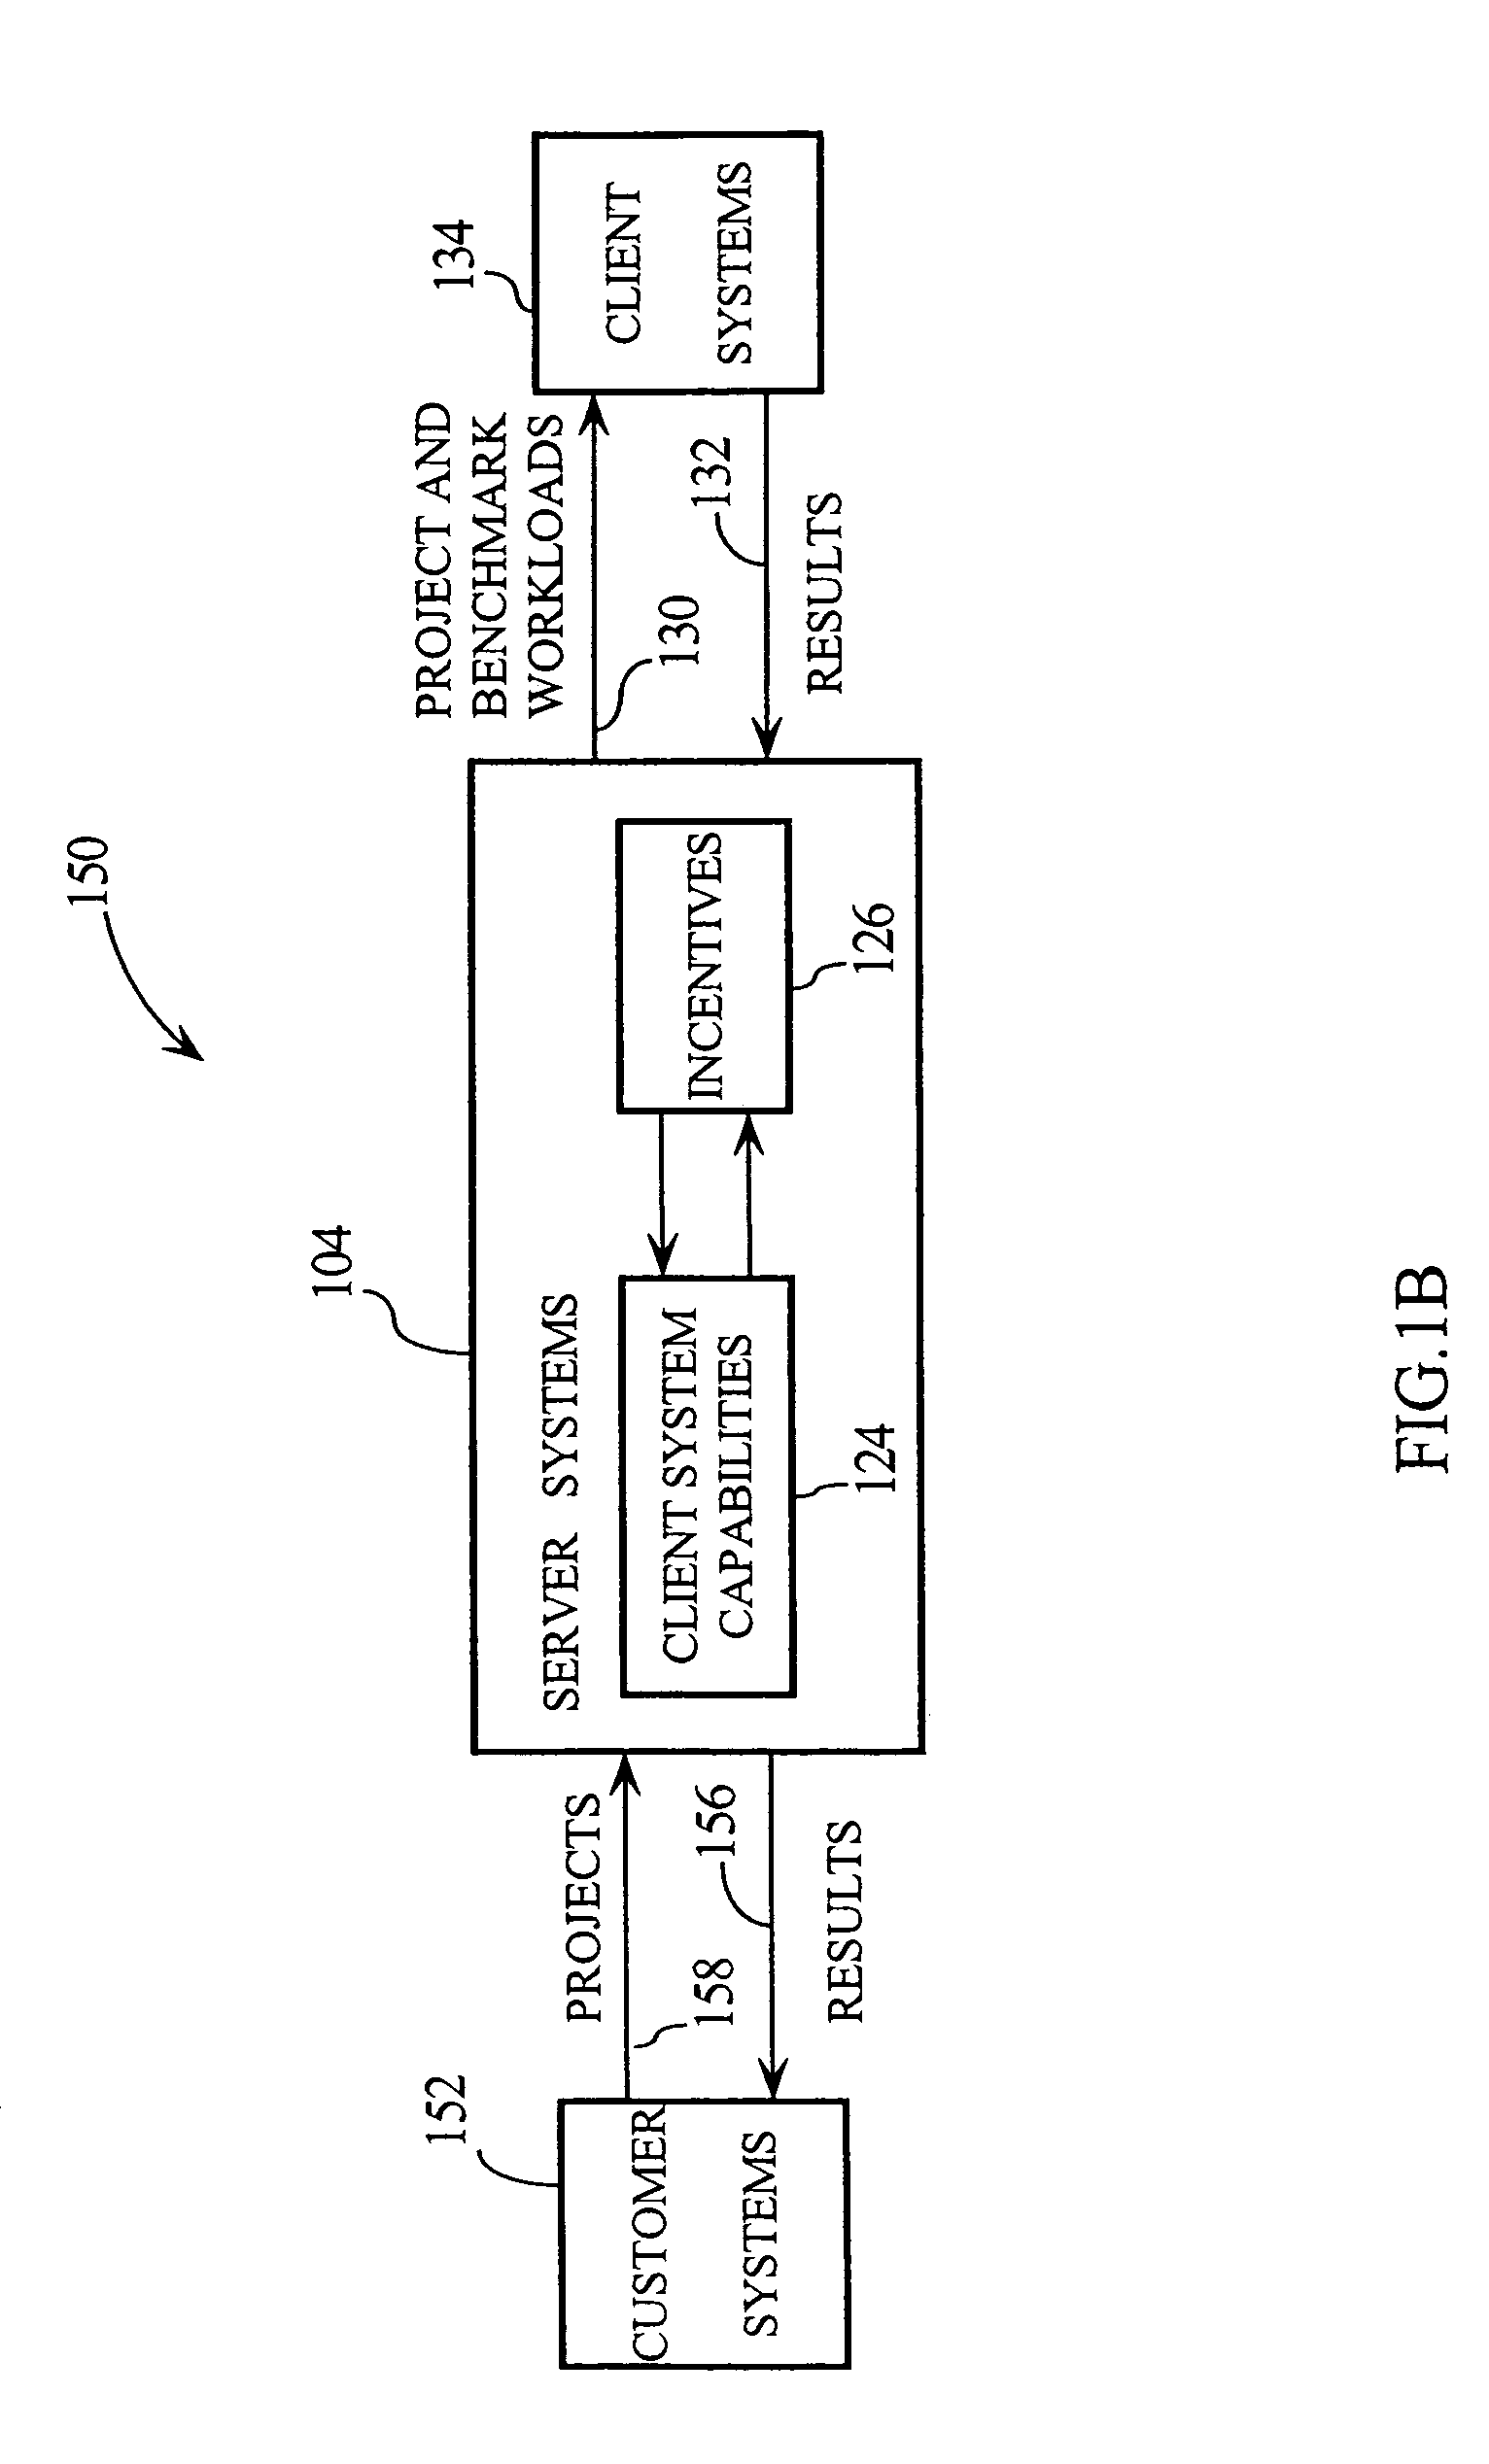 Data sharing and file distribution method and associated distributed processing system